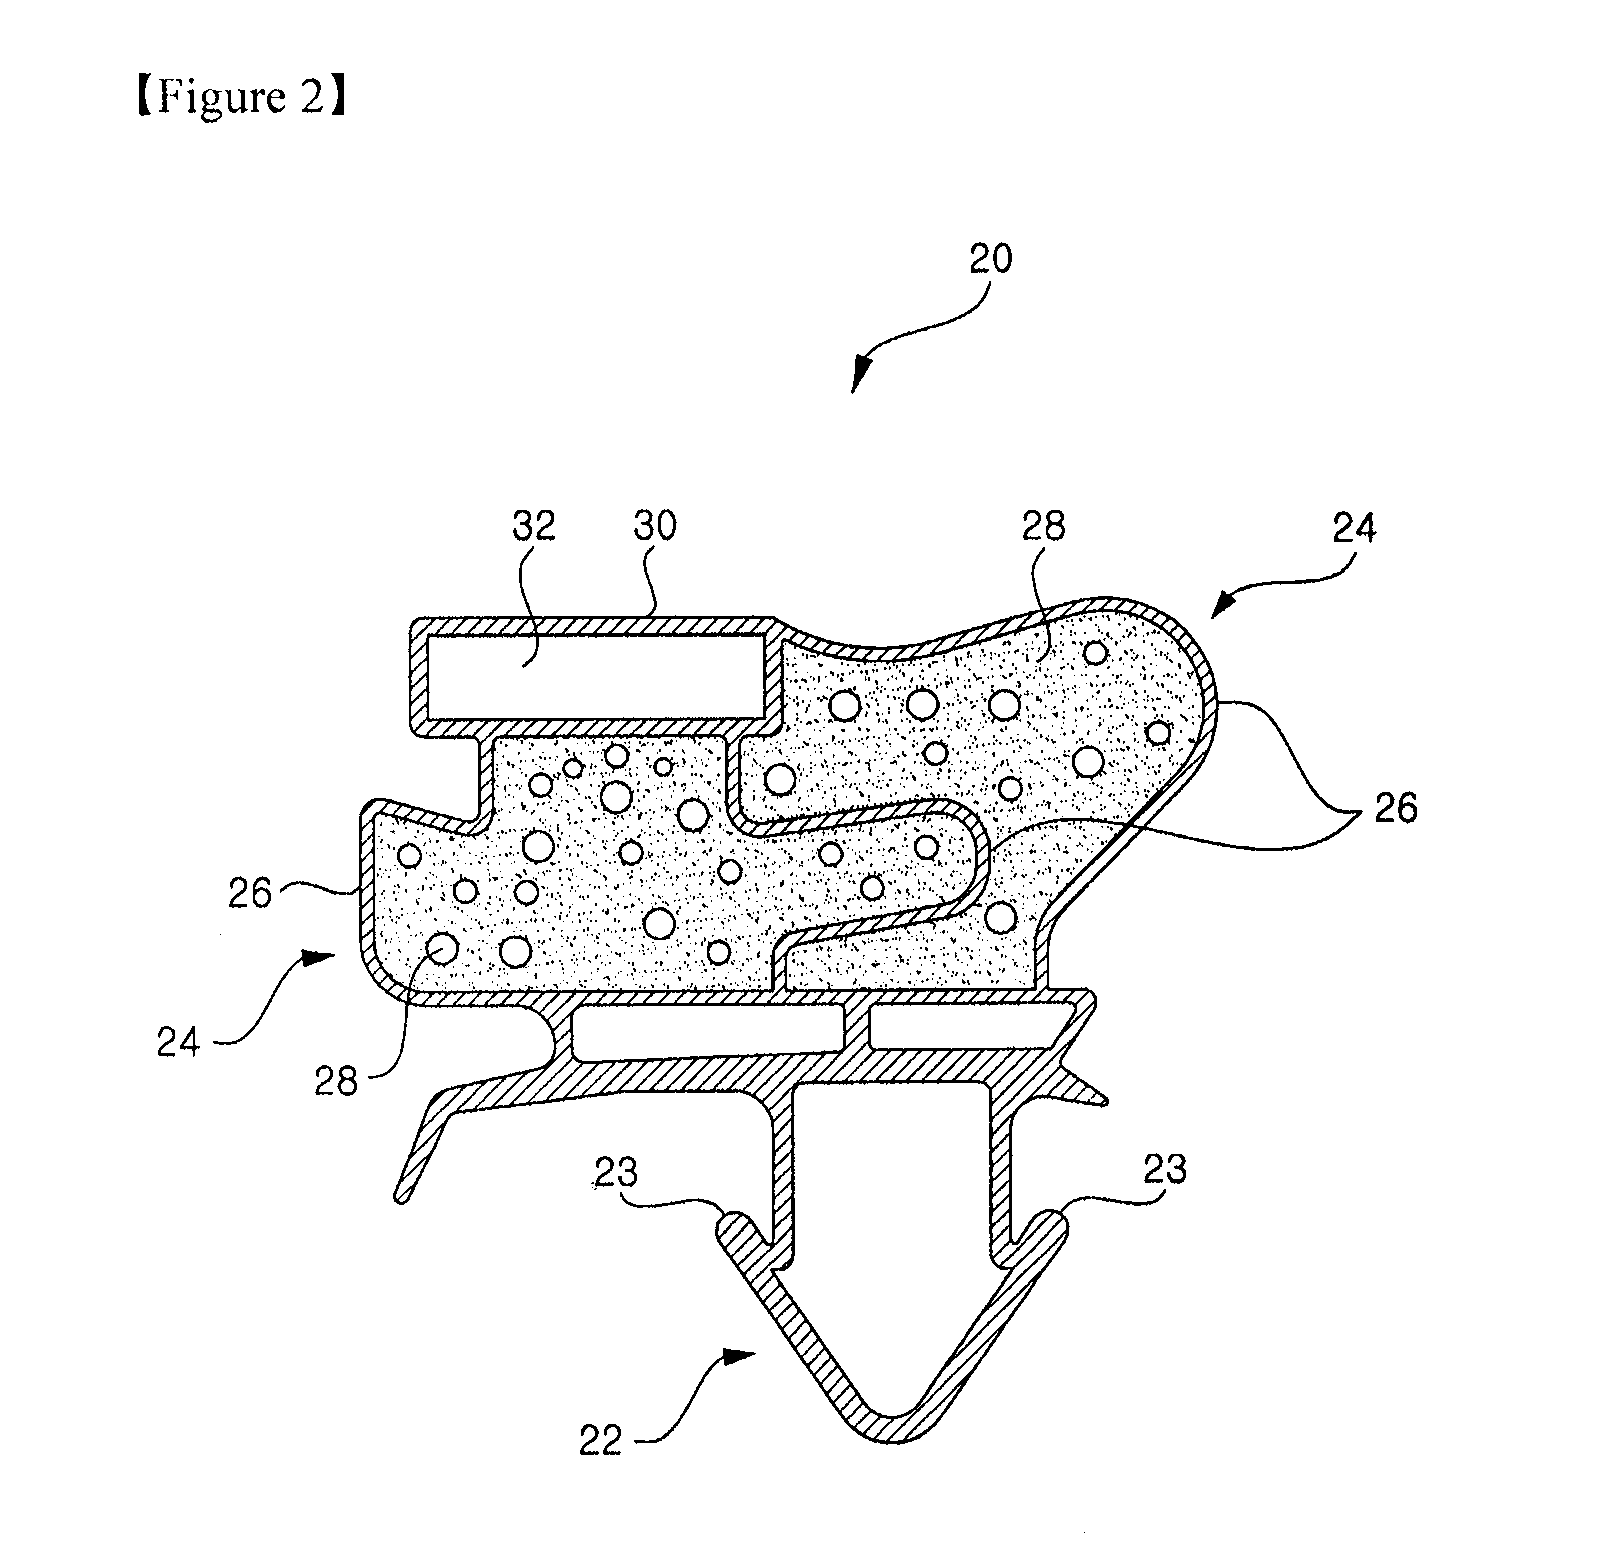 Gasket of Door for Refrigerator and Making Method the Same